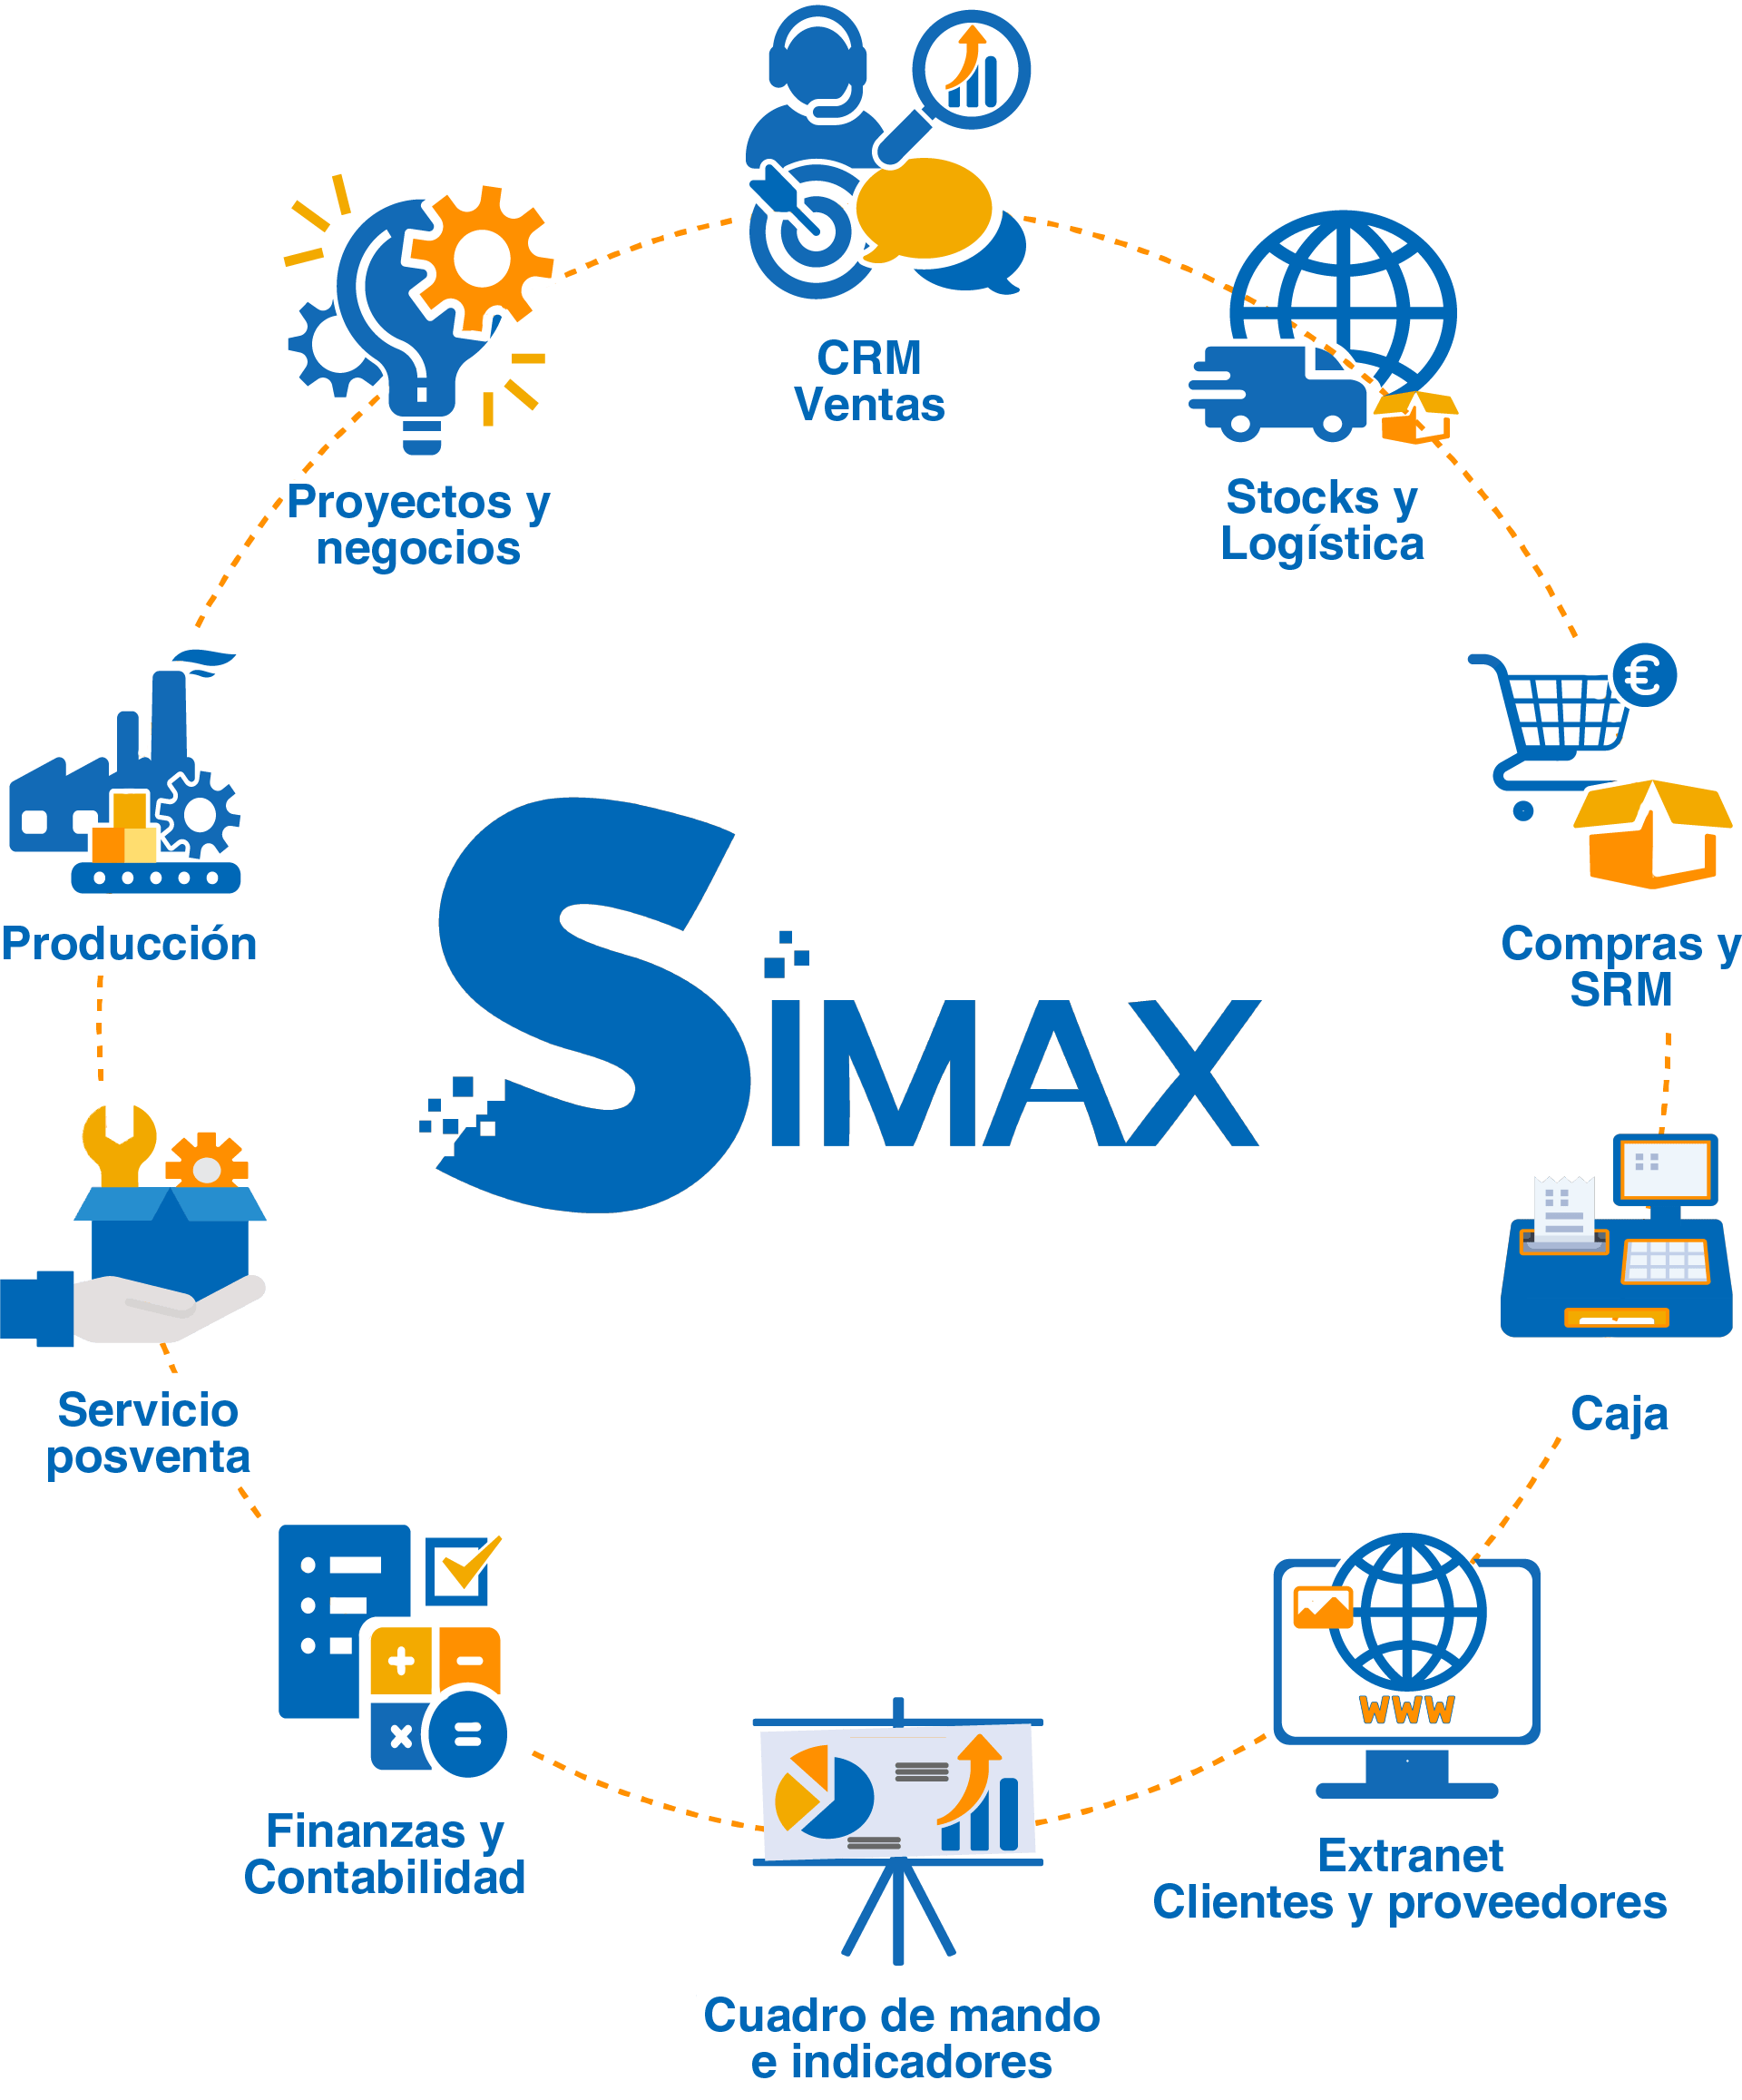 NOUT -  Solutions SIMAX™ - Accueil